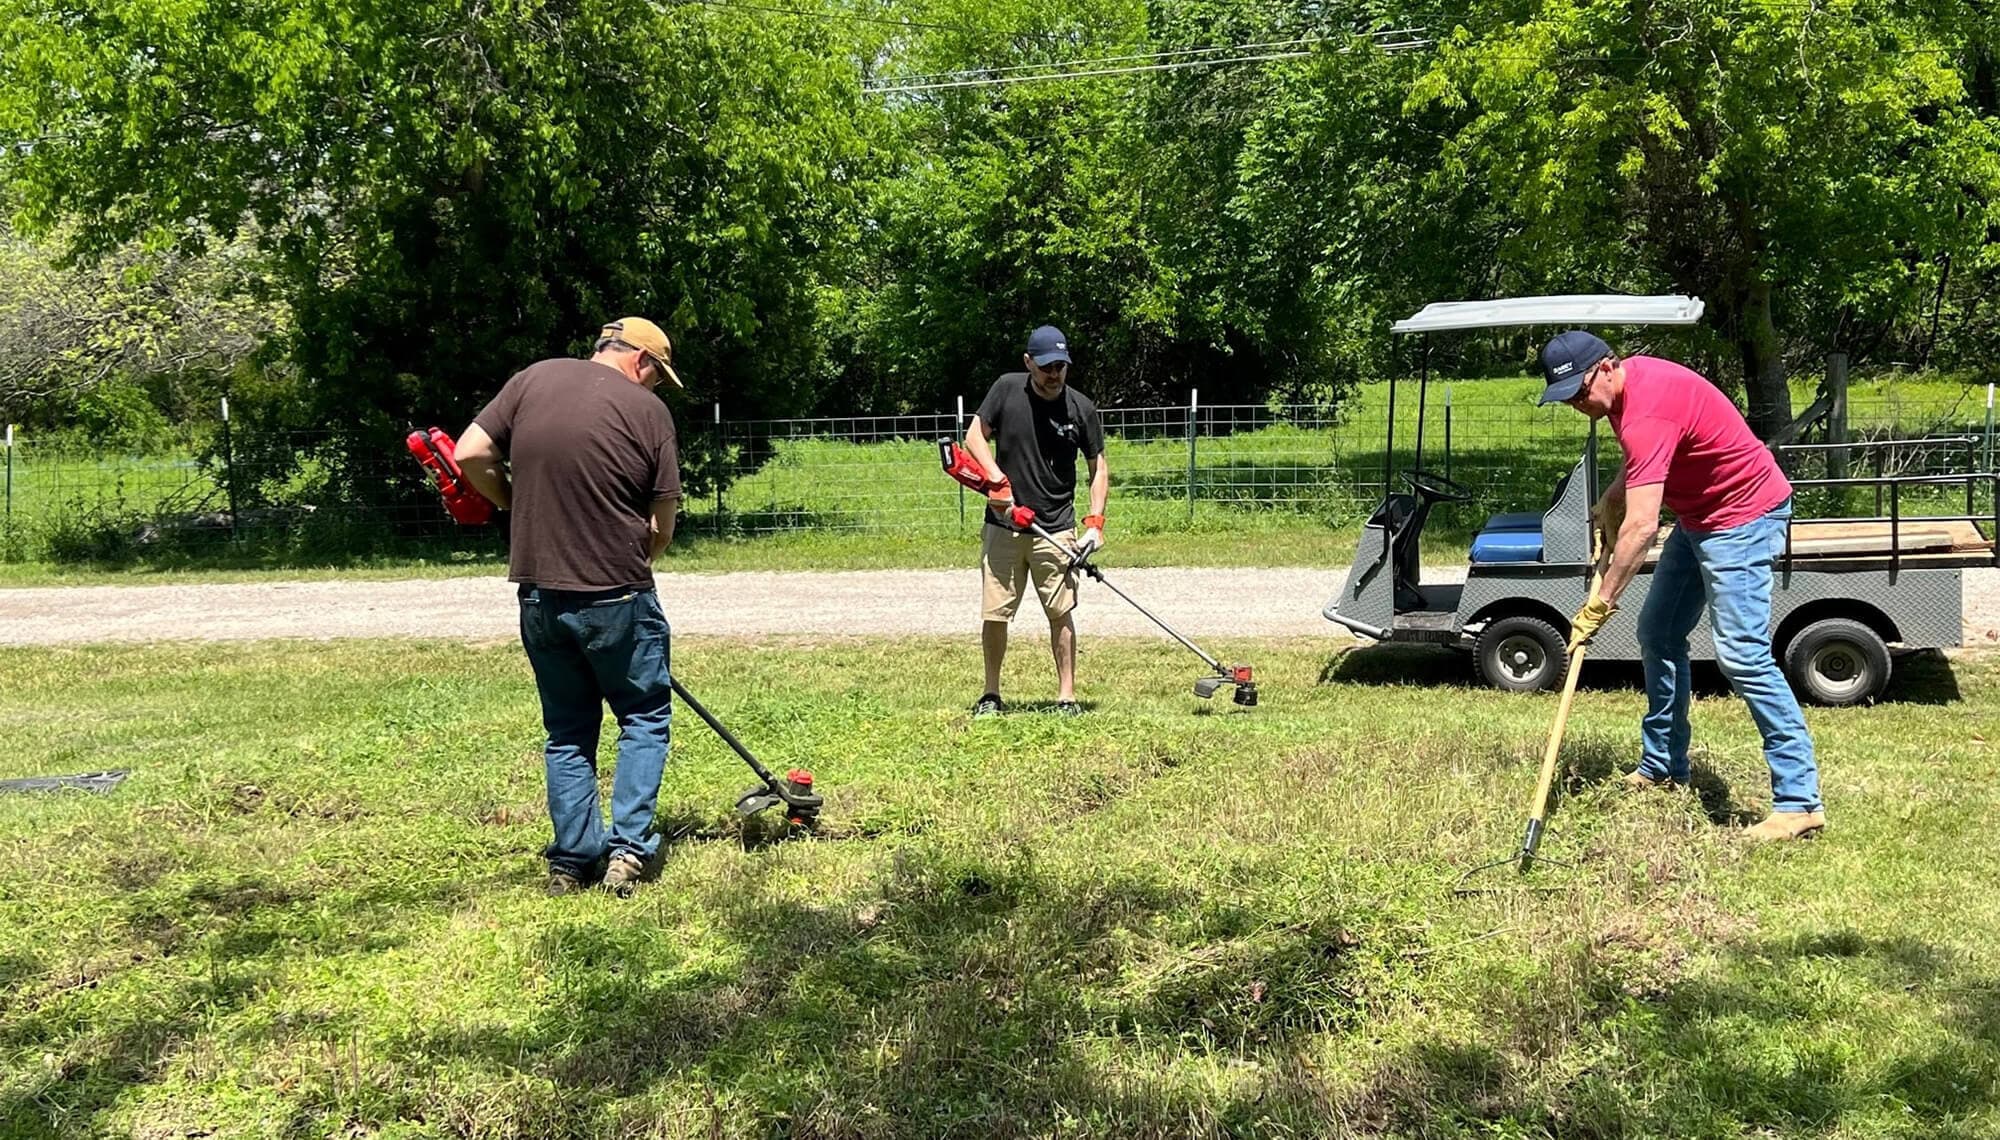 Volunteers cleaning up a yard with tools